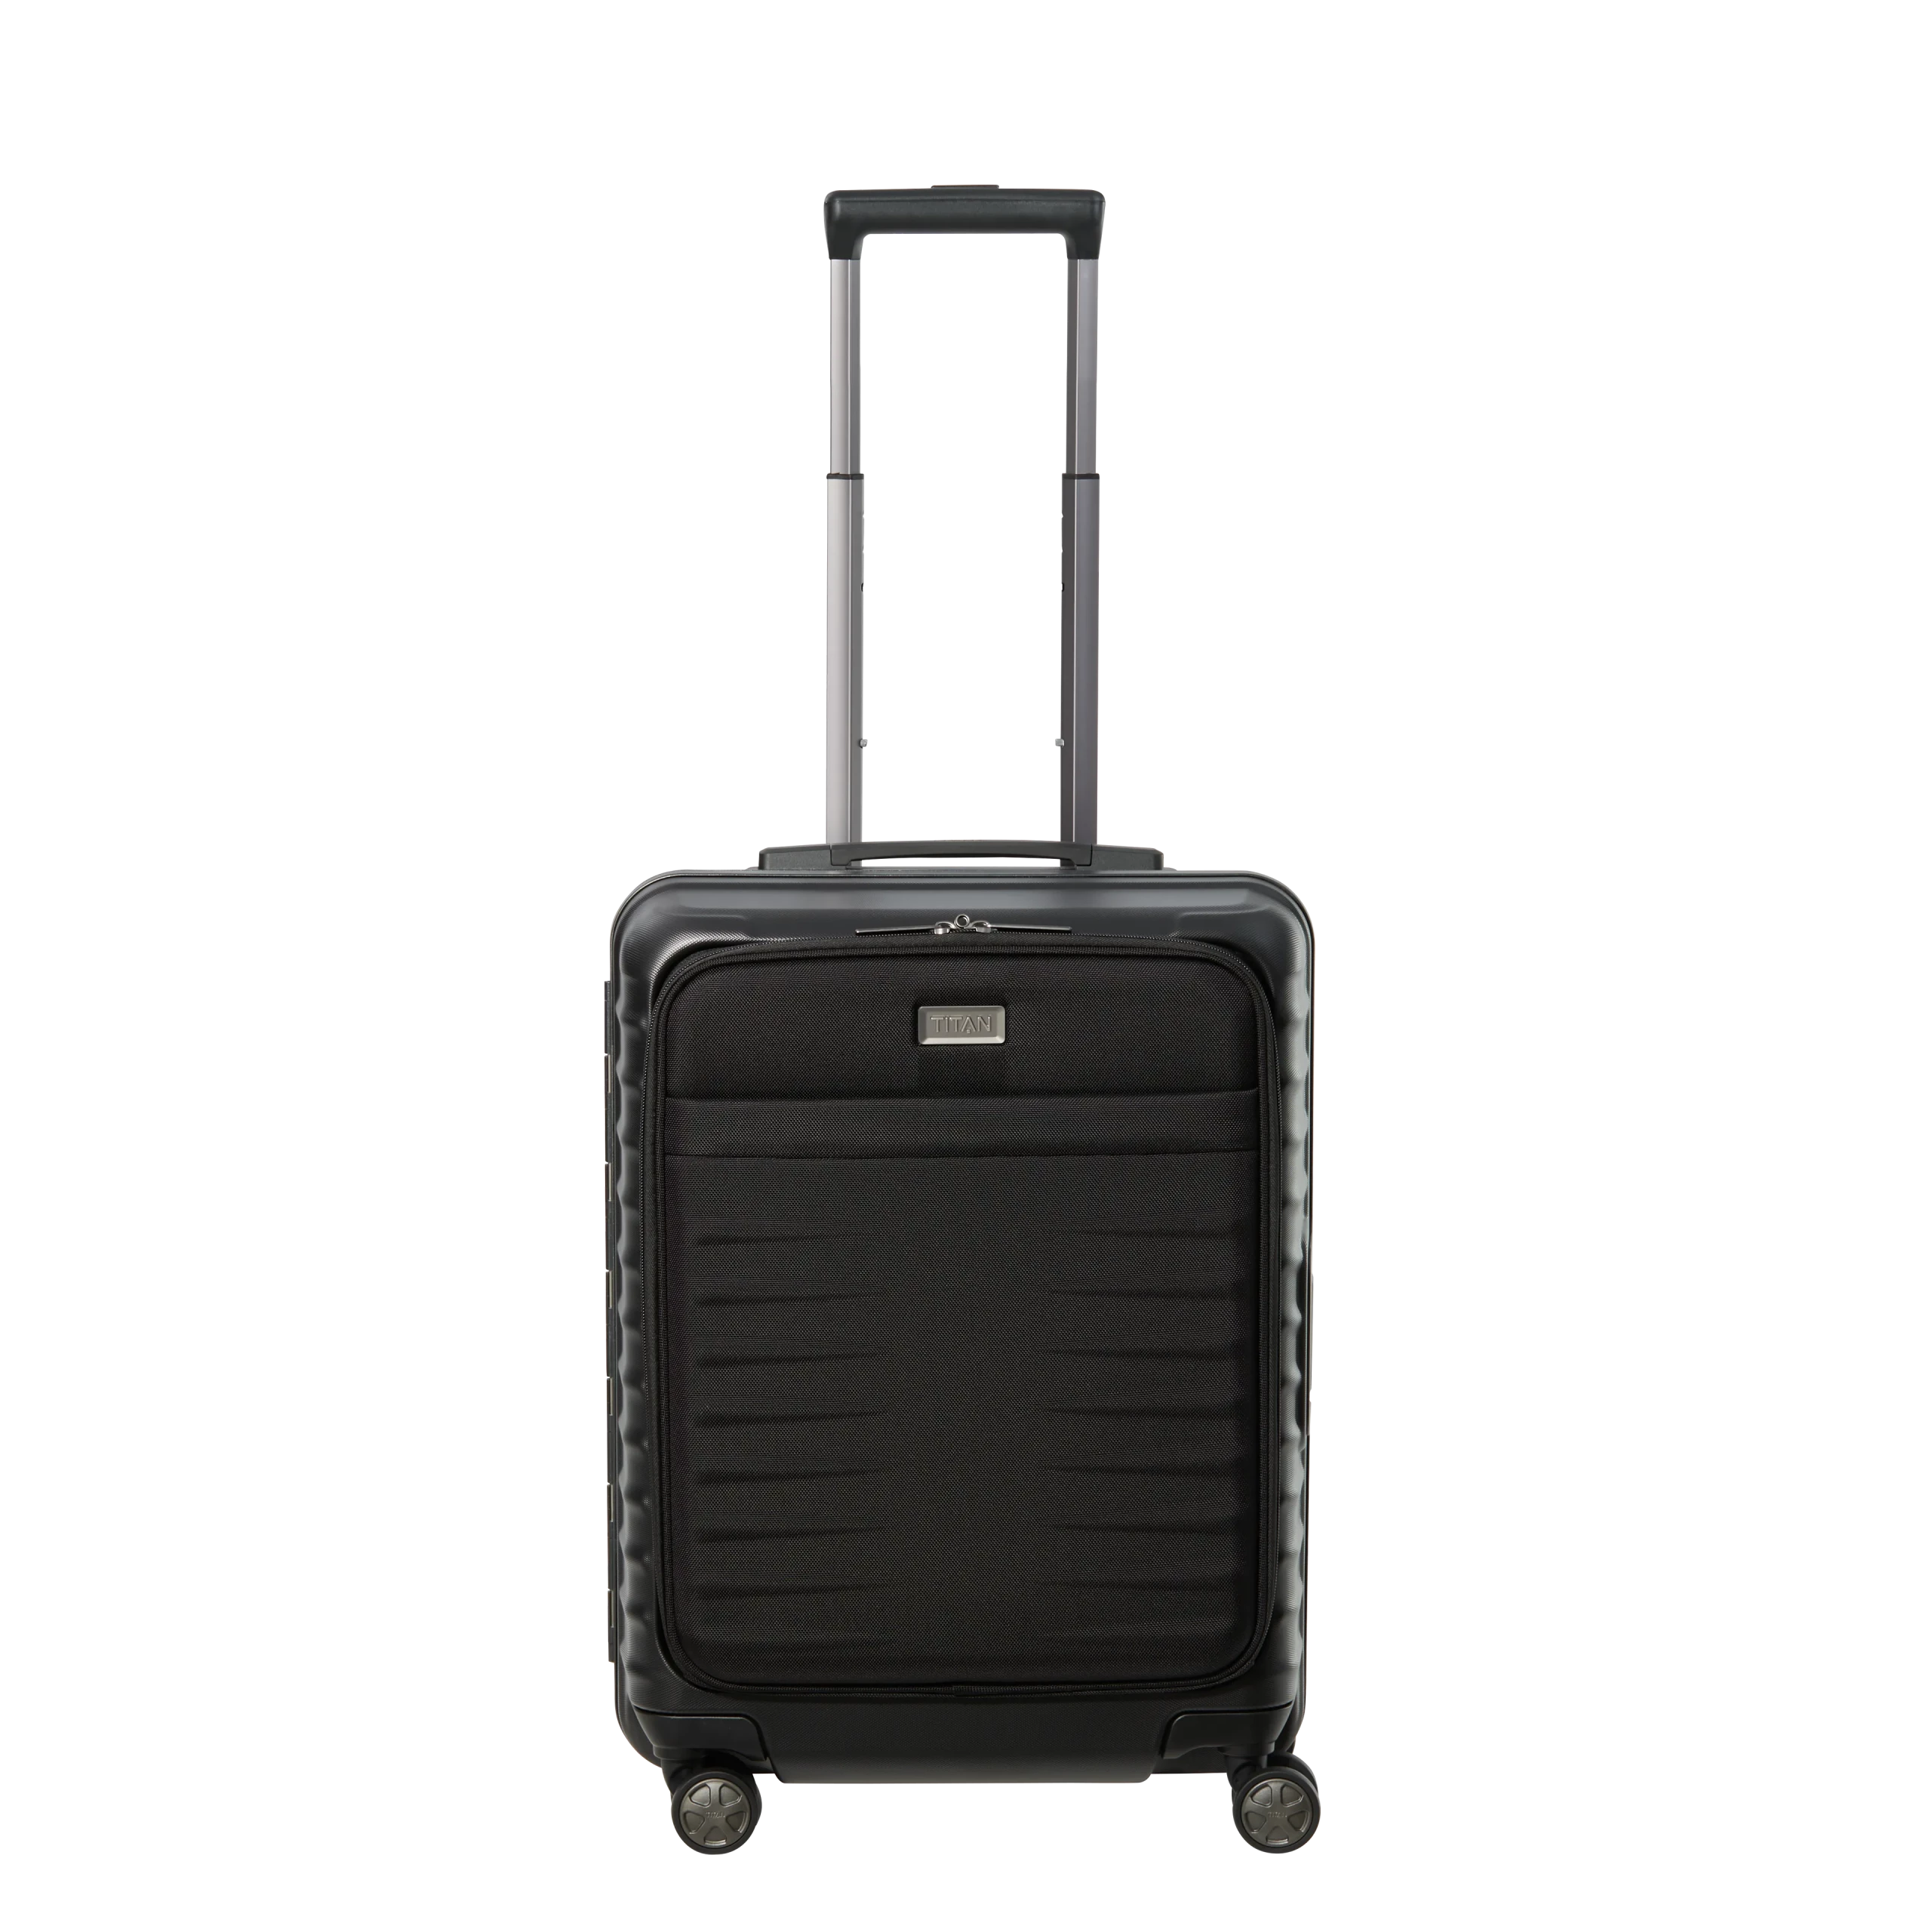 TITAN LITRON FRAME TROLLEY S WITH FRONT POCKET